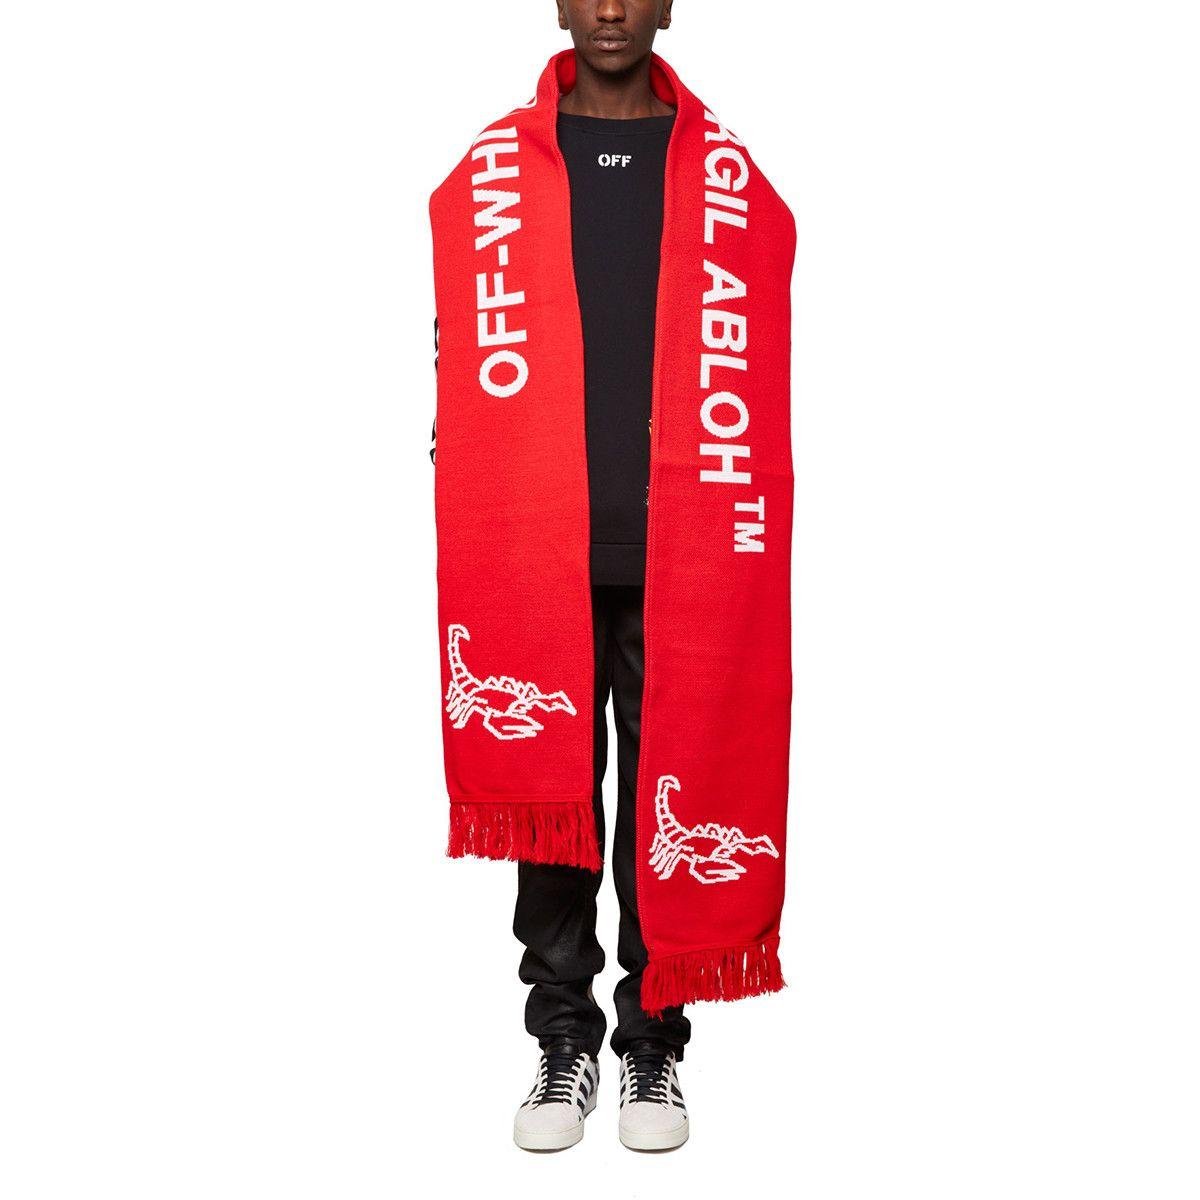 Red and White Scorpion Logo - Scorpion big scarf from the S/S2017 Off-White c/o Virgil Abloh ...